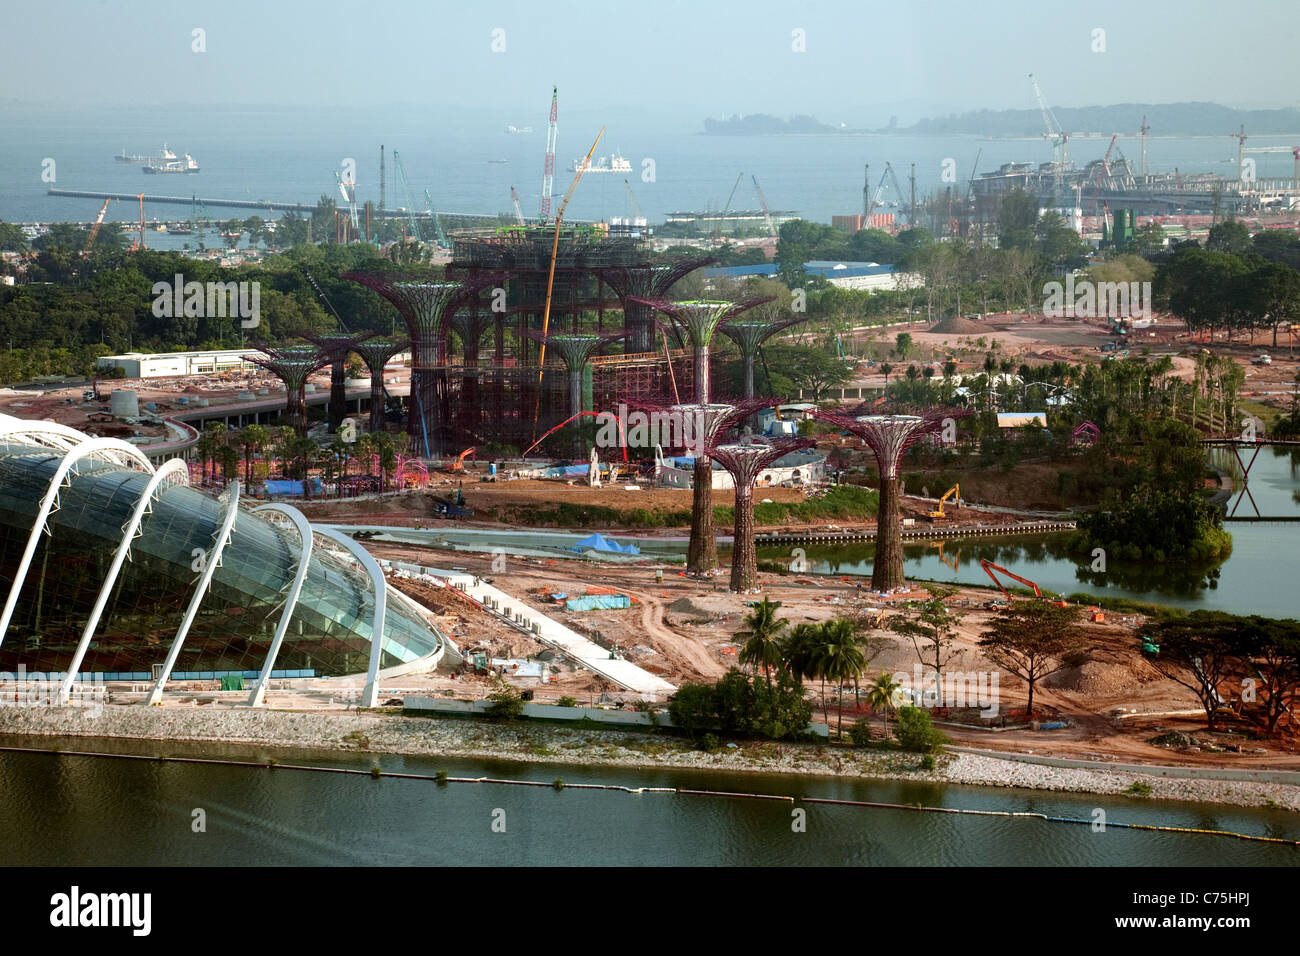 New construction on land reclaimed in the Marina area, seen from the Singapore Flyer Singapore Asia Stock Photo